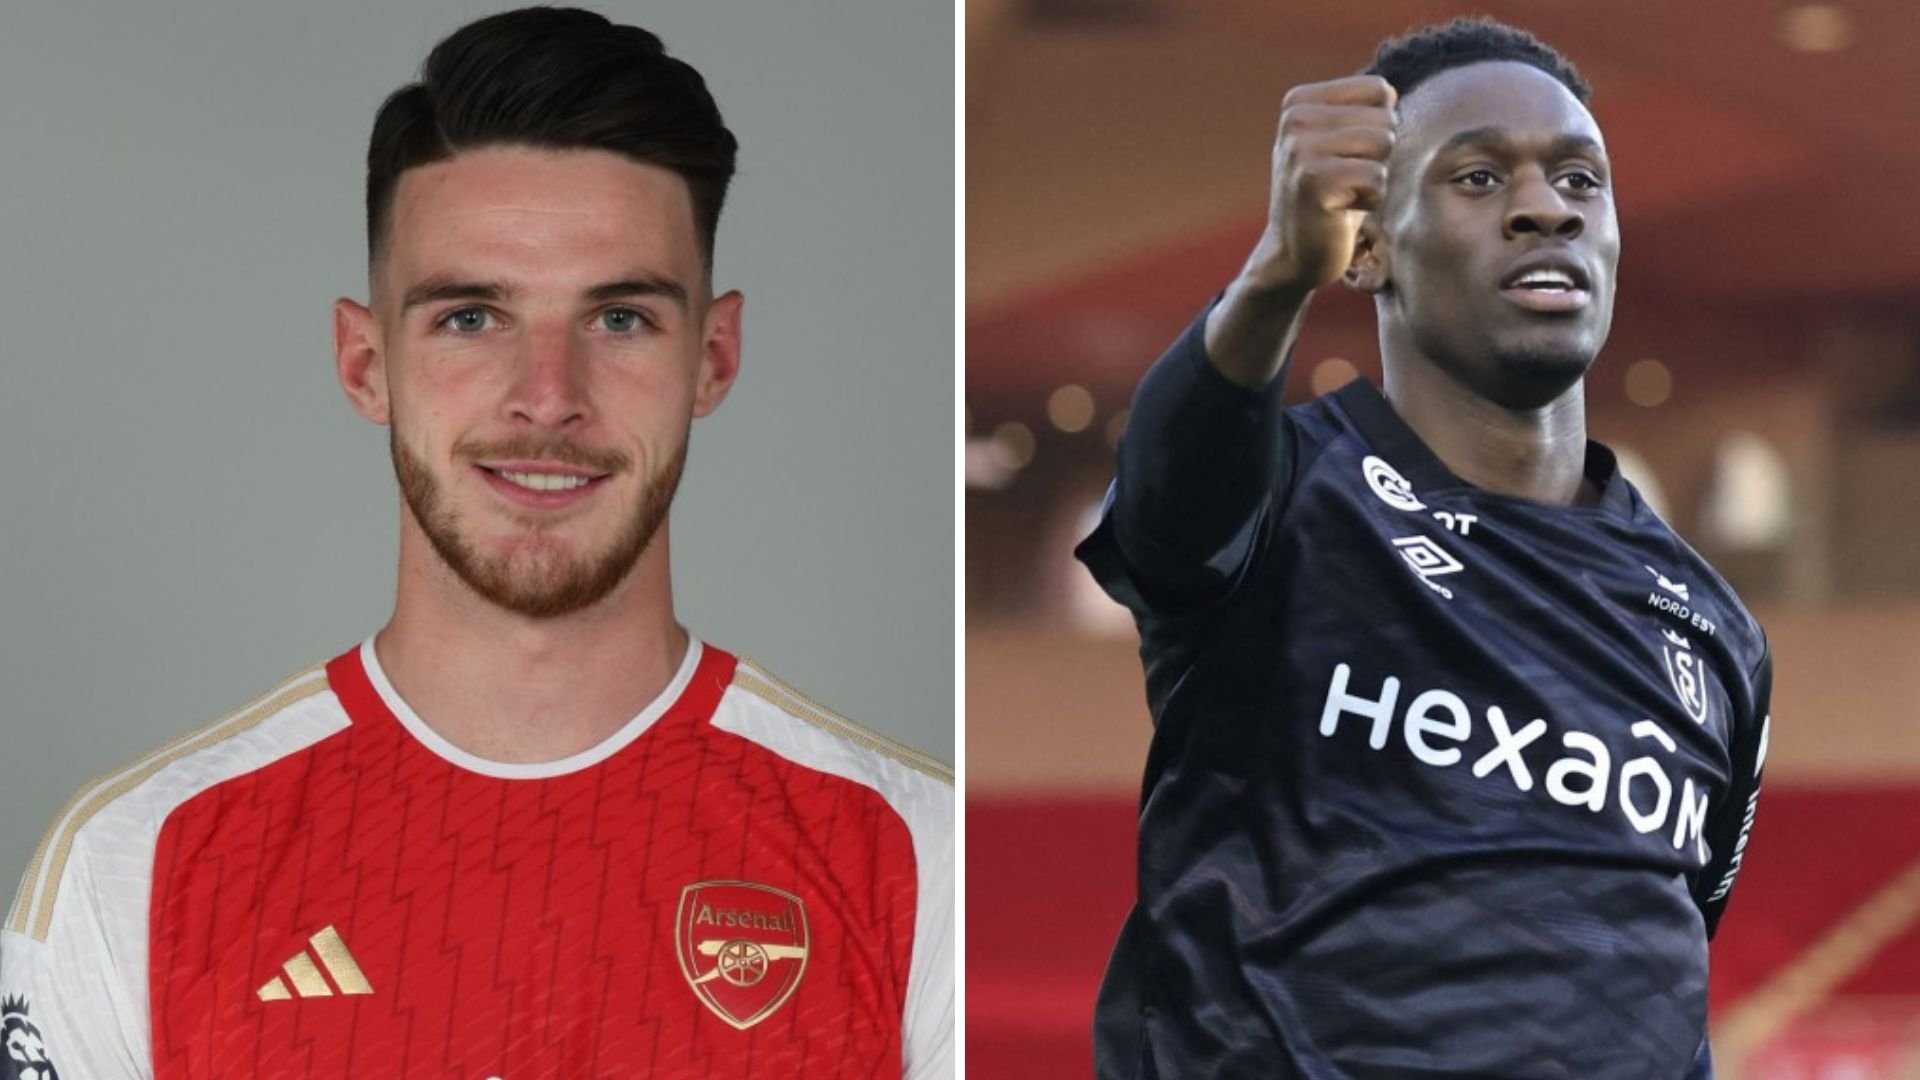 Arsenal transfer news LIVE Gunners want £50m for Folarin Balogun, Arteta hails Rice signing, trio LEFT OUT of US tour Flipboard